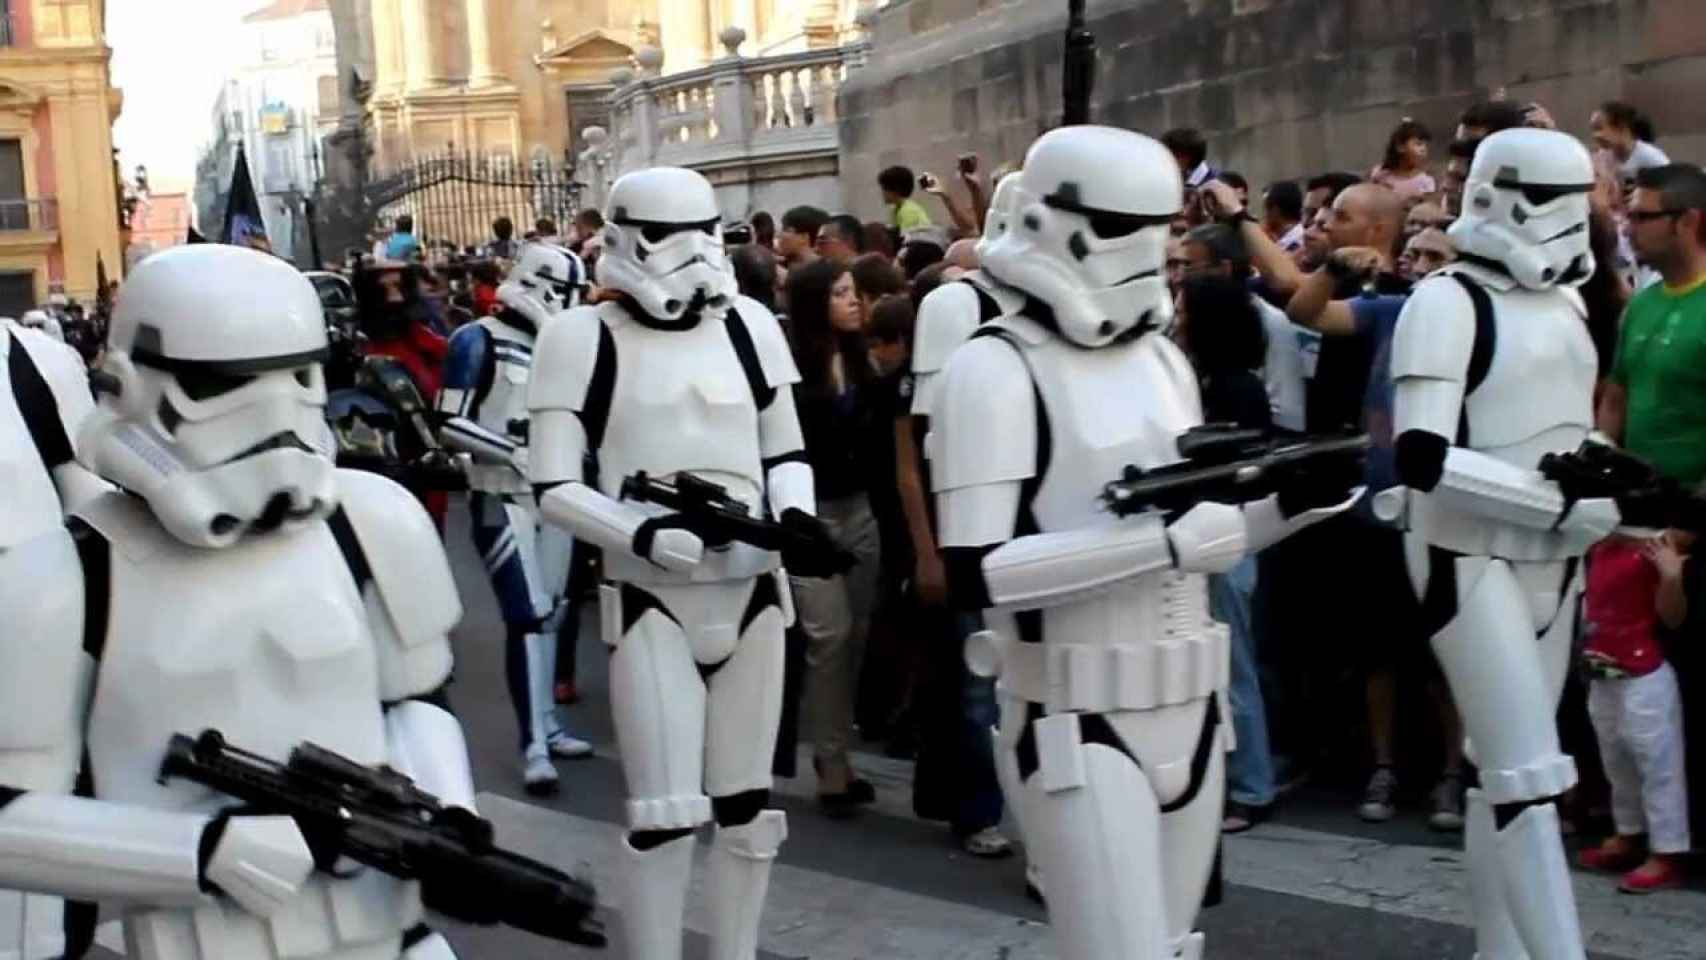 ejercito imperial imperio galactico star wars pasacalle